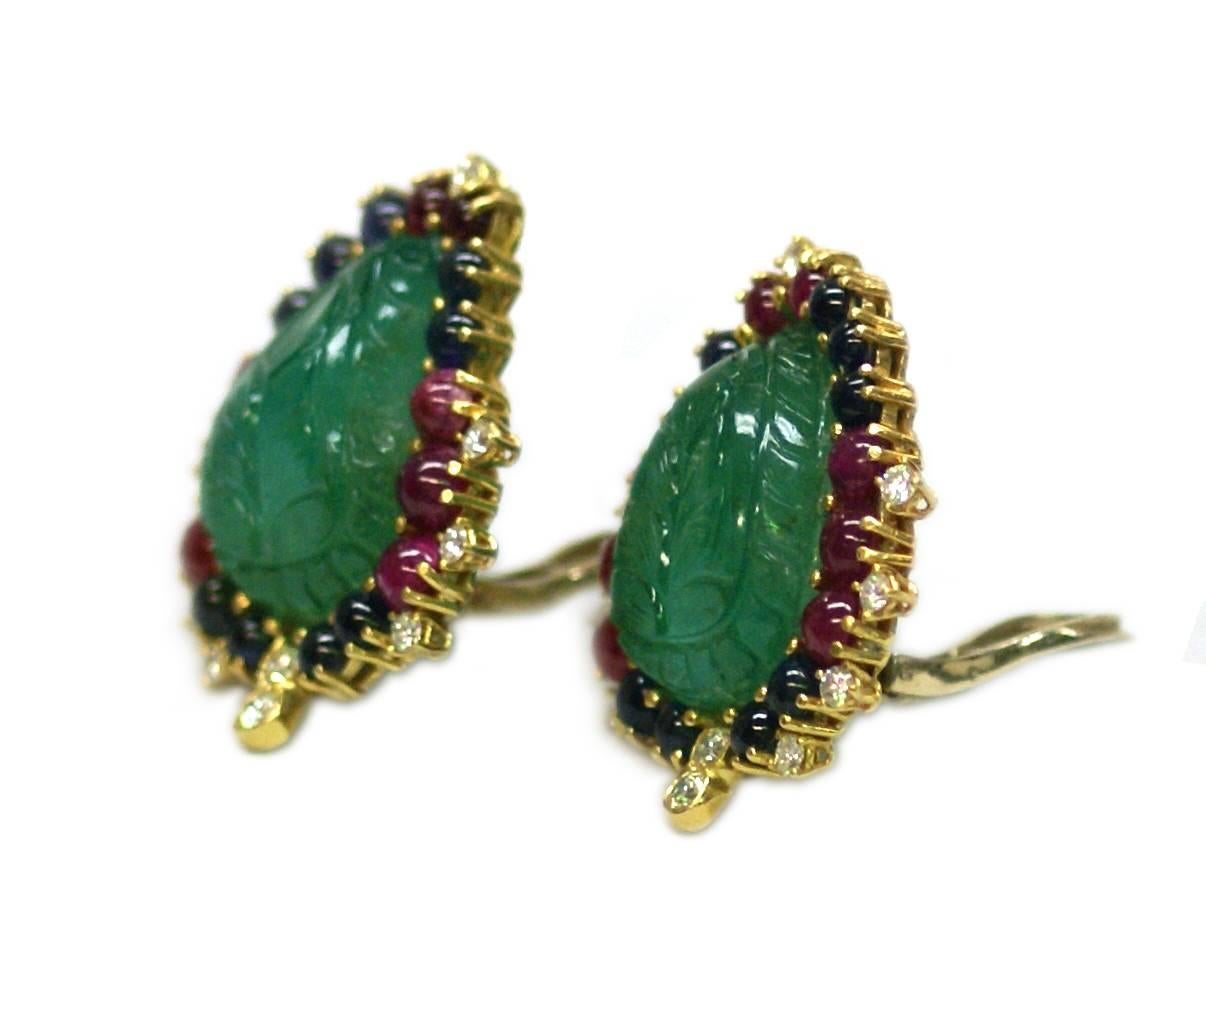 A pair of ear clips of foliate design, the main body consisting of two carved emerald leaves, highlighted by cabochon rubies, cabochon sapphires and diamonds, on an 18kt yellow gold mounting. Circa 1965